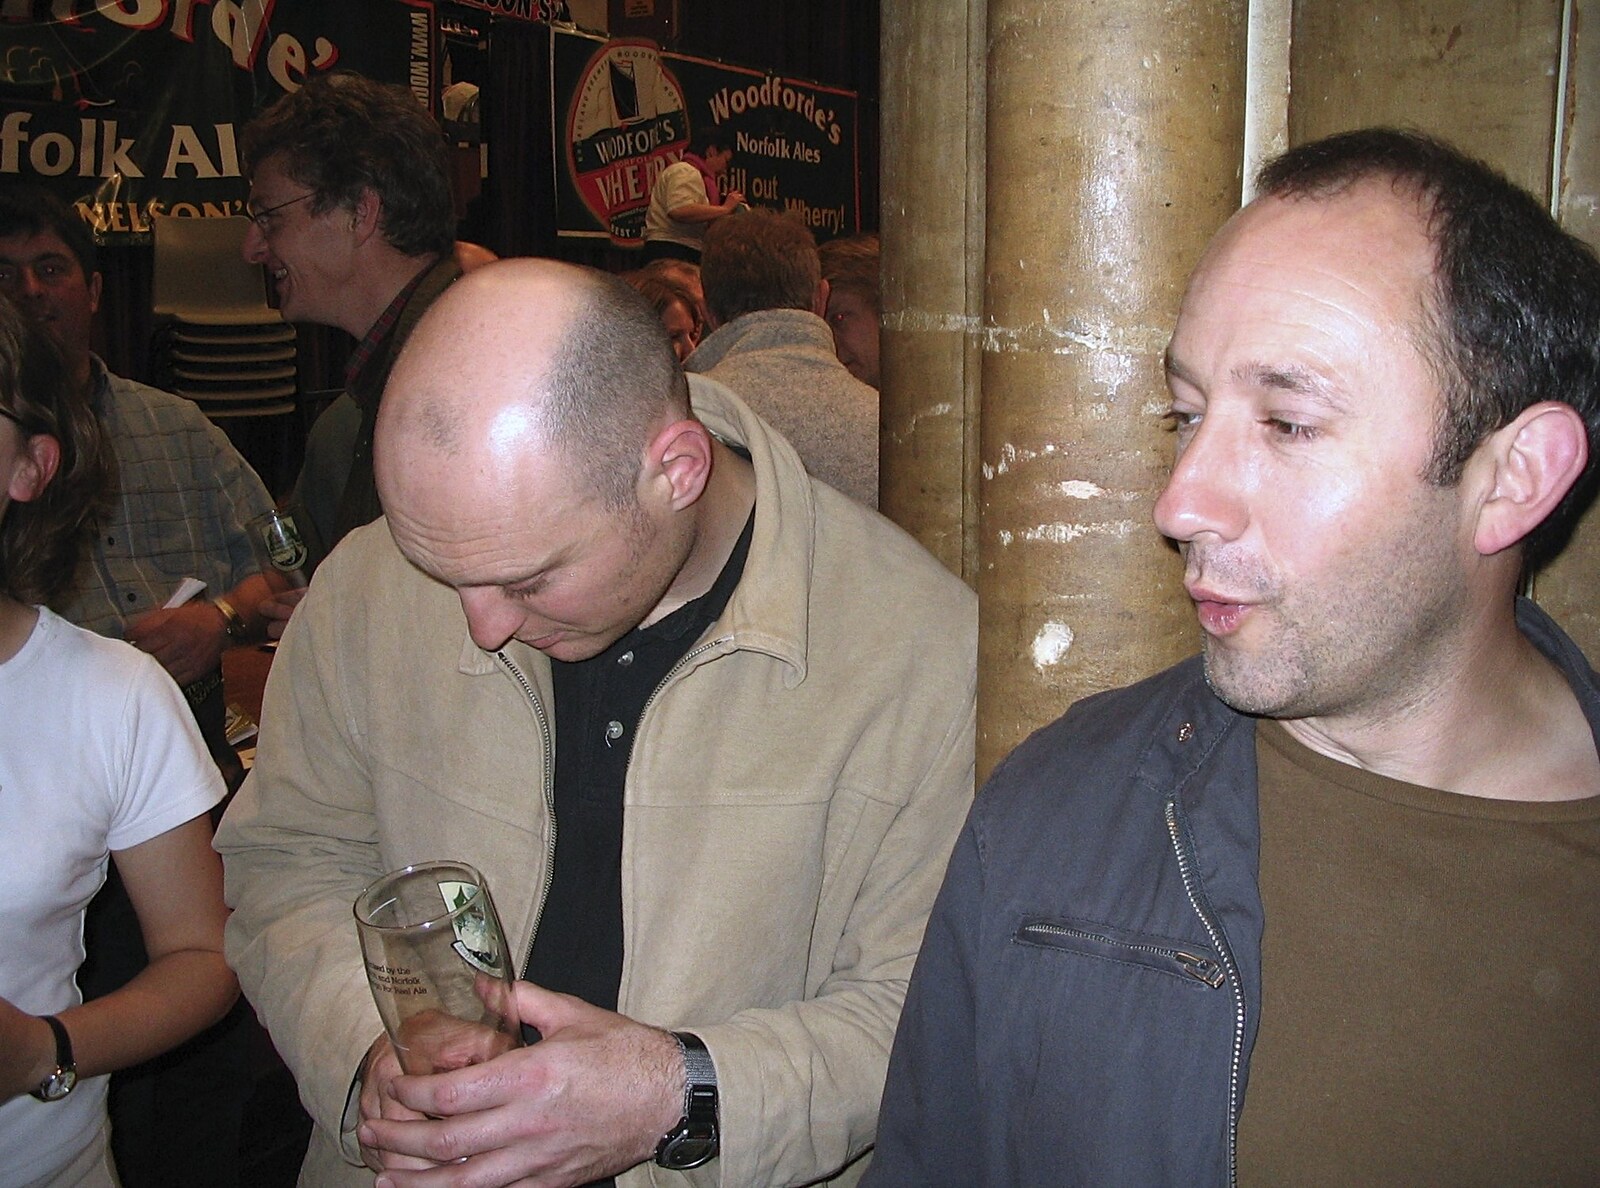 Gov and DH lurk from The Norfolk and Norwich Beer Festival, St. Andrew's Hall, Norwich - 27th October 2004